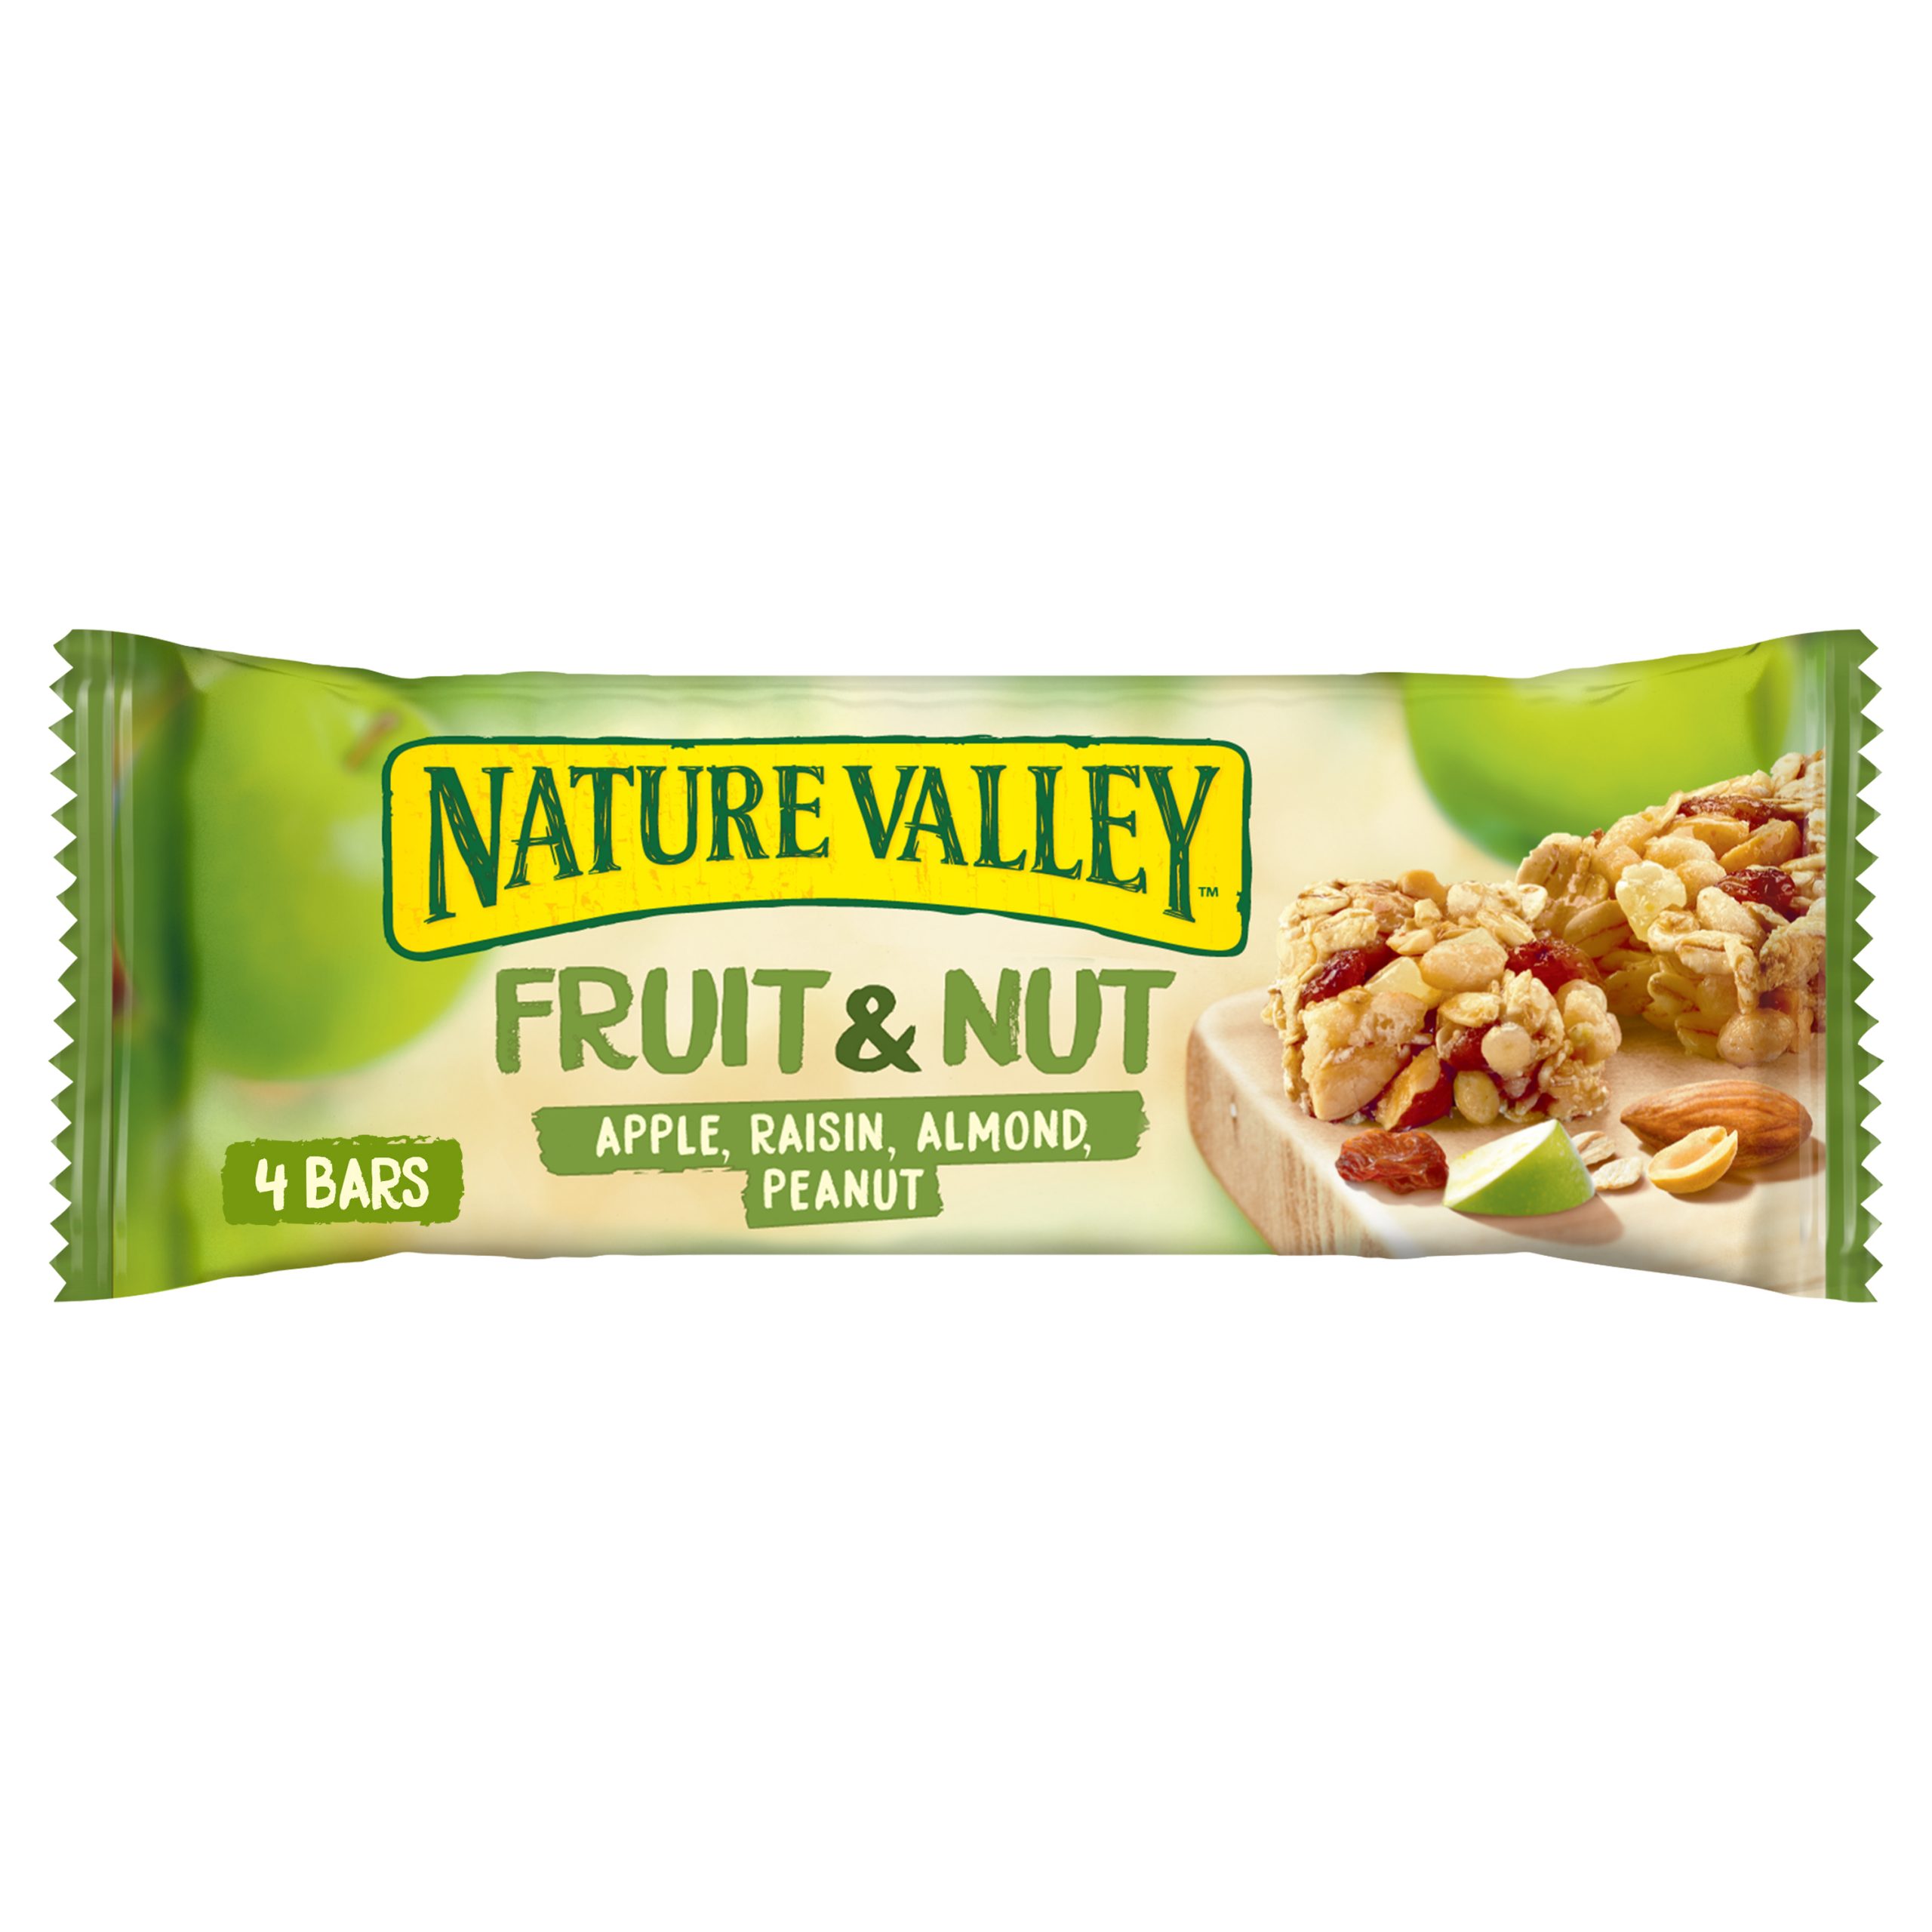 Go nuts for Nature Valley’s HFSS compliant fruit & nut bar